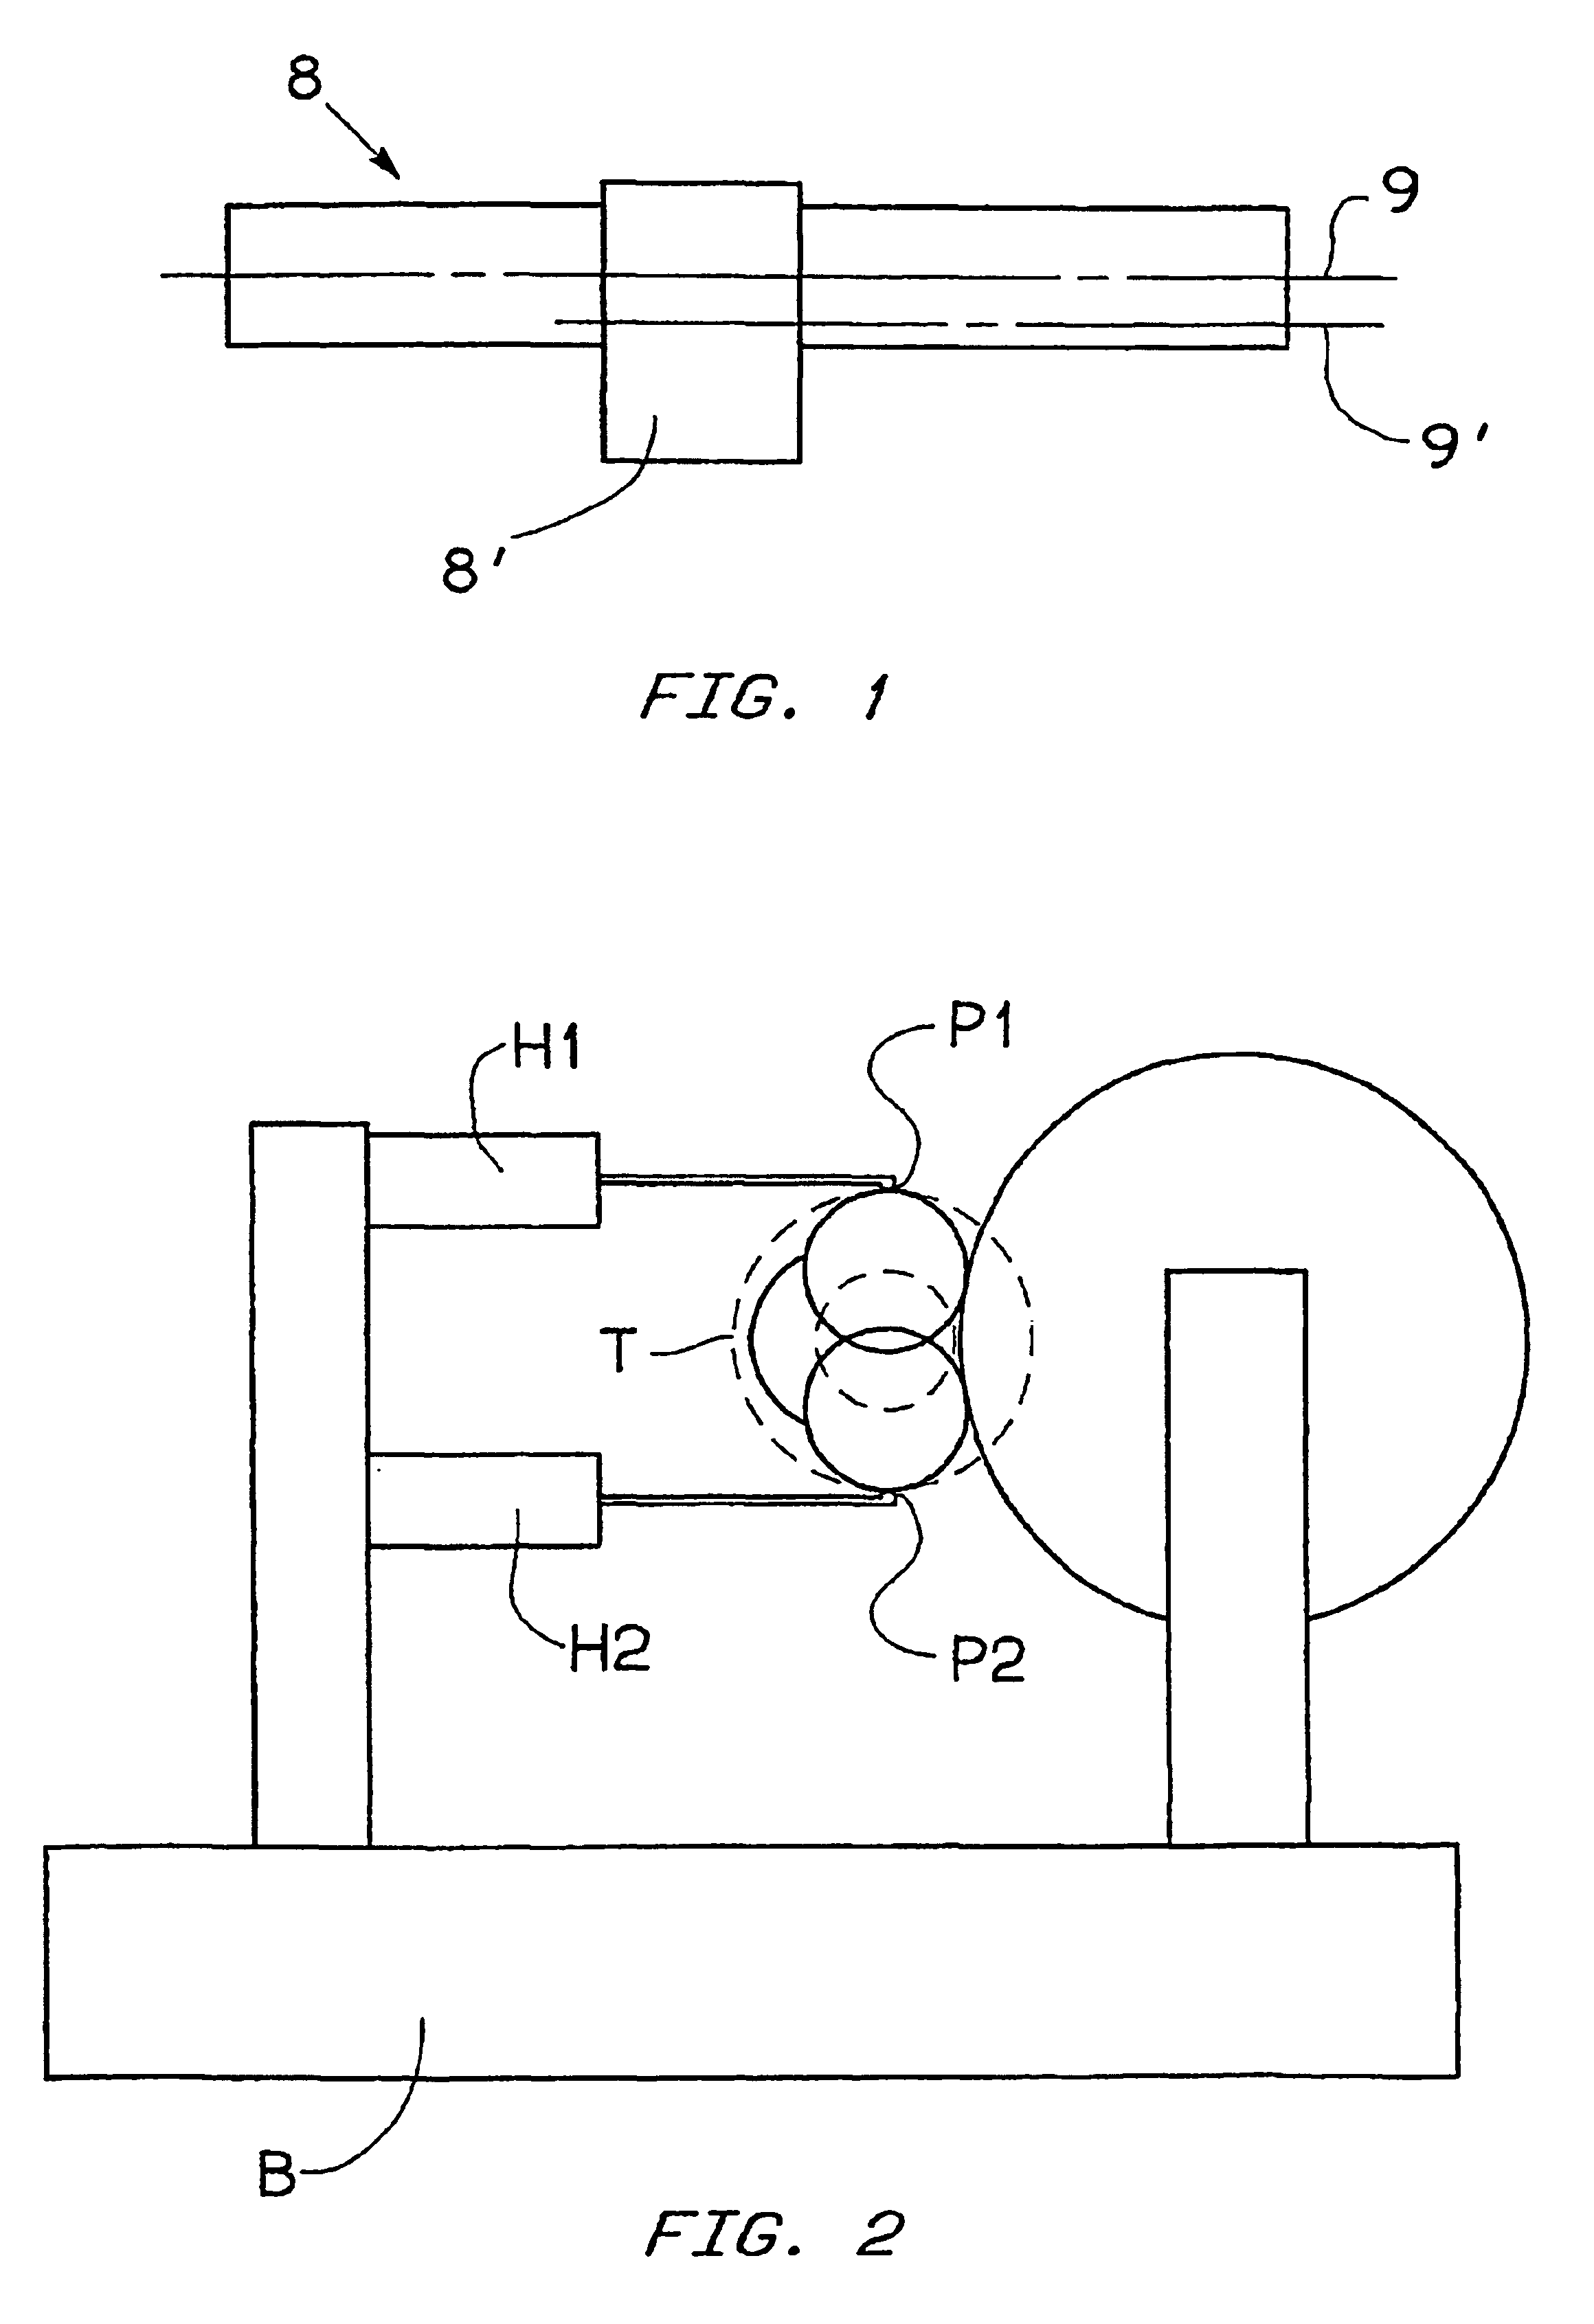 Apparatus for the diameter checking of eccentric portions of a mechanical piece in the course of the machining in a grinding machine